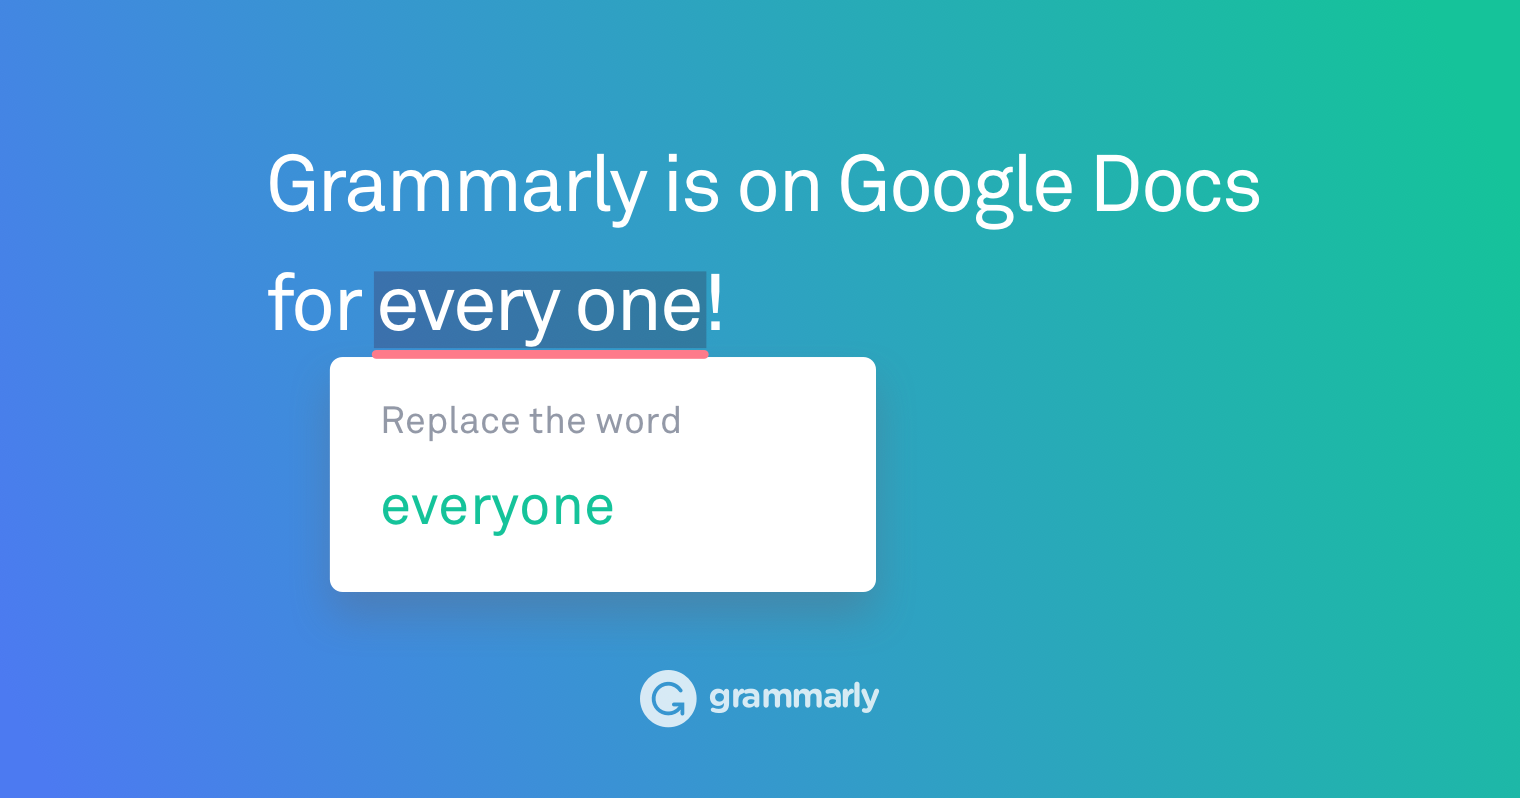 Image of Grammarly correcting a spelling mistake laid over a gradient background